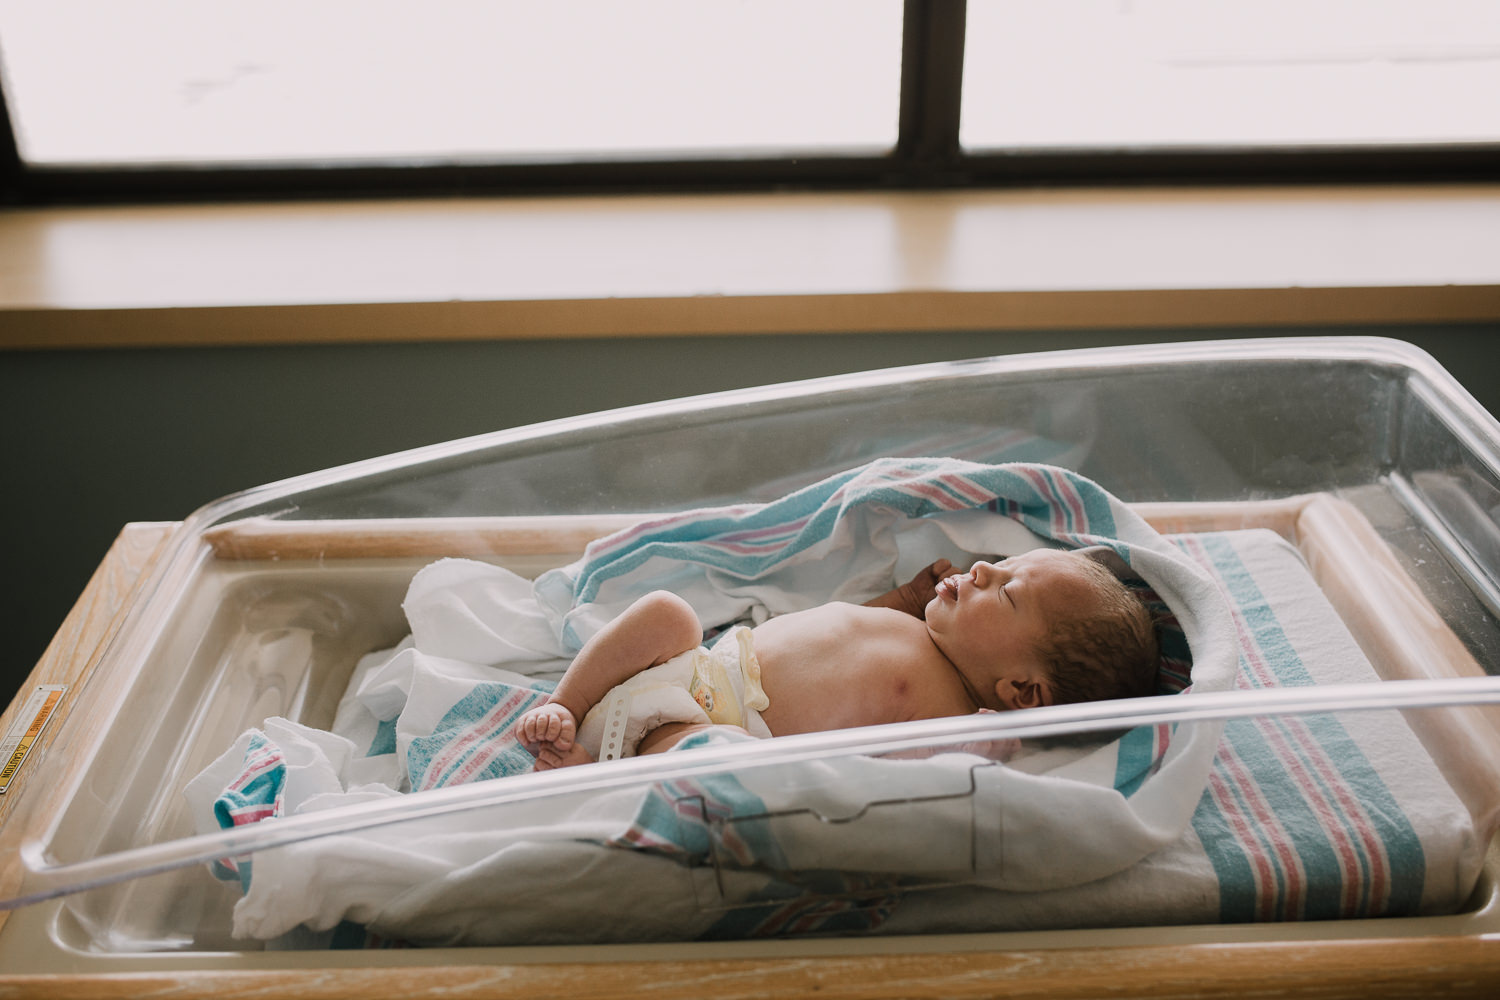 10 hour old baby boy in diaper sleeping in hospital bassinet - Newmarket Fresh 48 Photos